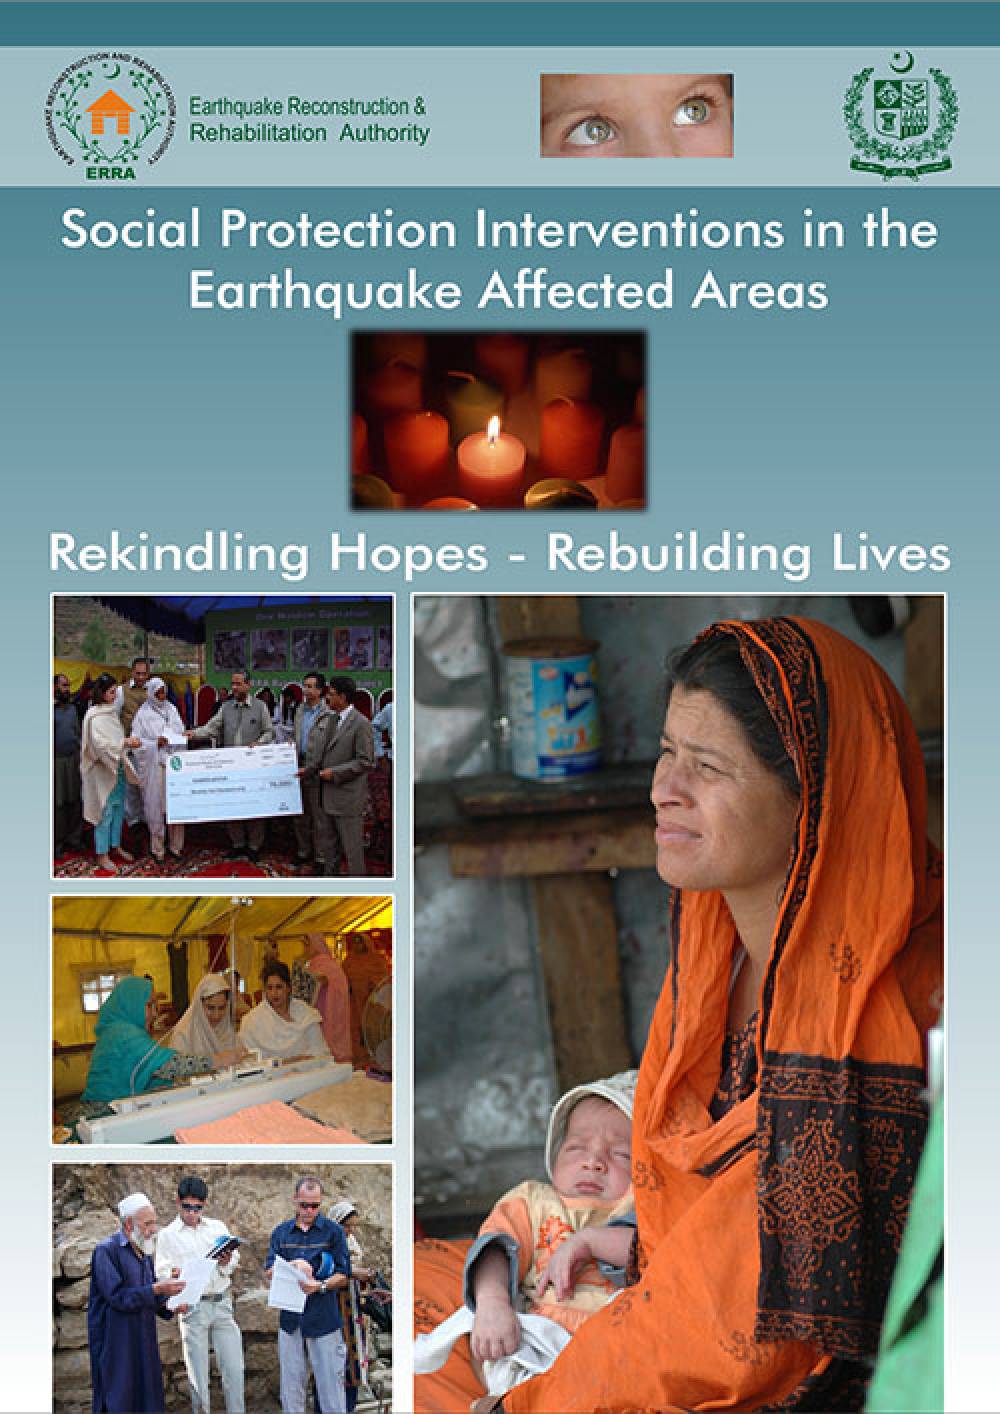 Social Protection Interventions in the Earthquake Affected Areas